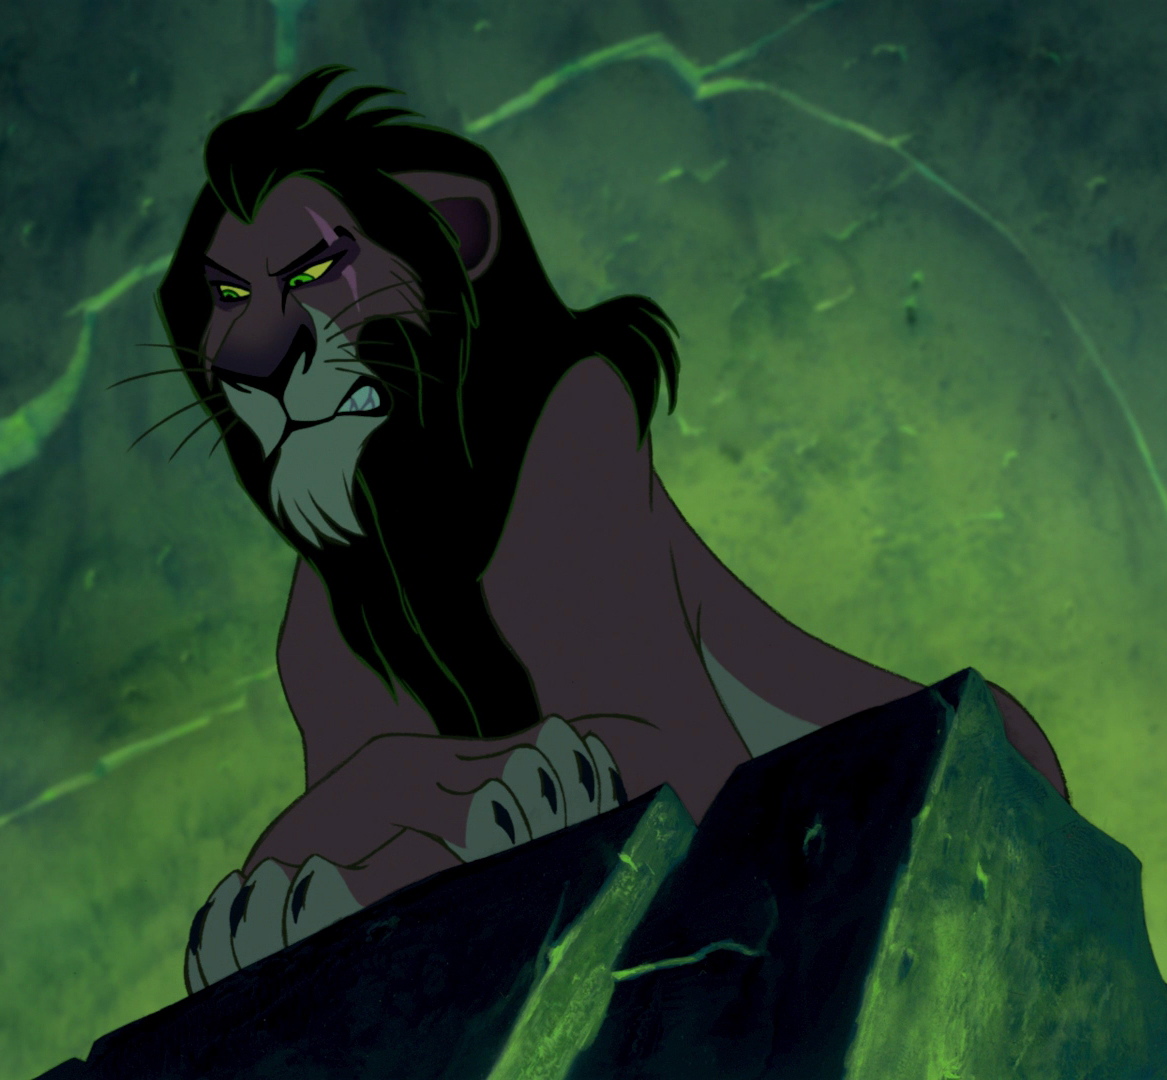 Scar Lion King - M Surrounded By Idiots - HD Wallpaper 